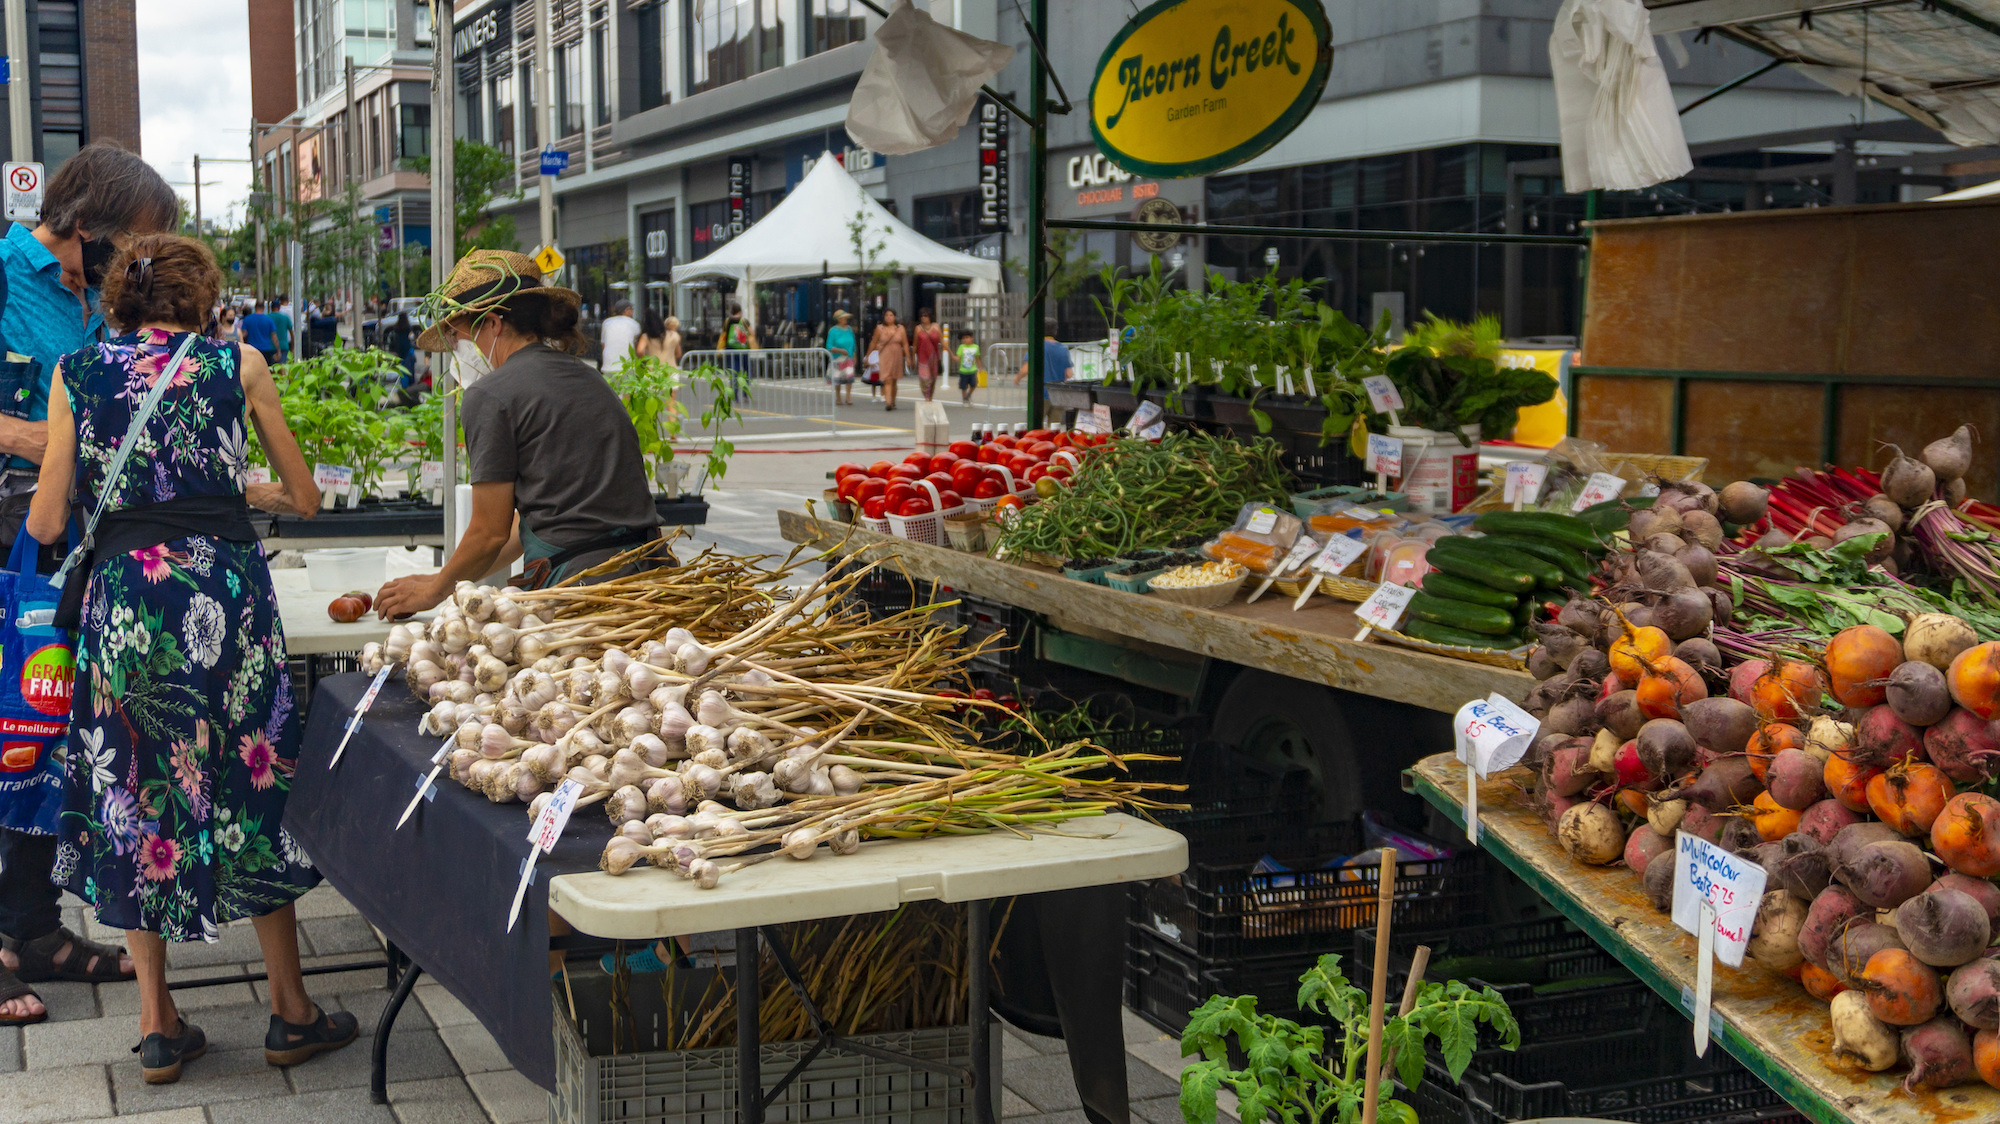 Farmers markets are booming—and growing their role as an essential food source